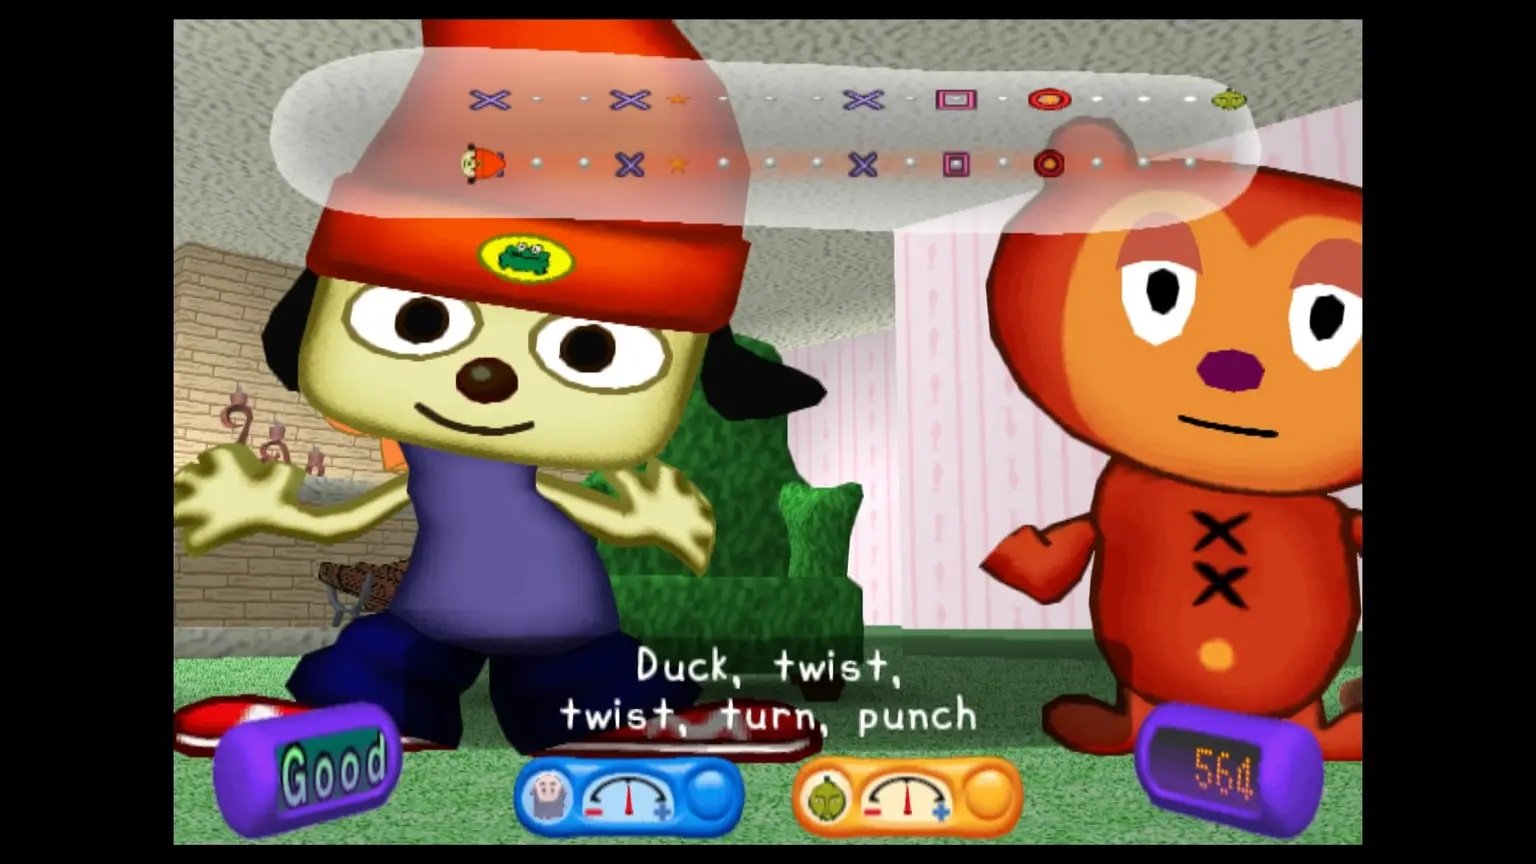 Watch 'PaRappa the Rapper' Online Streaming (All Episodes)